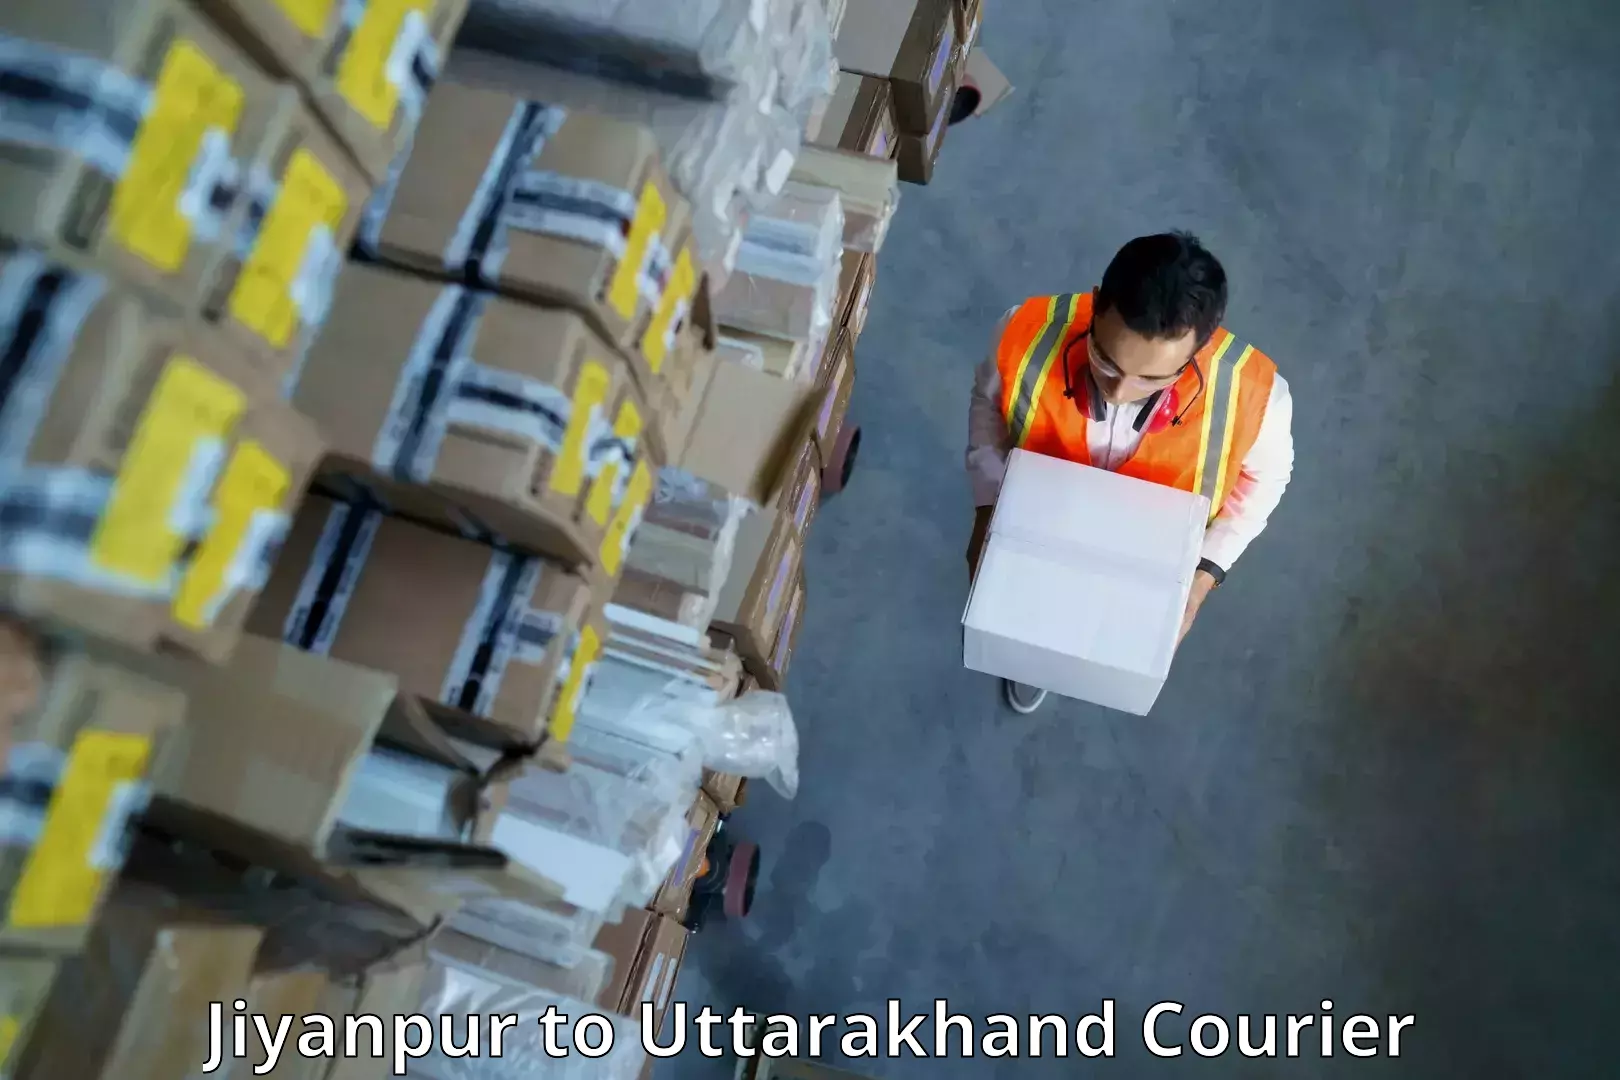 State-of-the-art courier technology Jiyanpur to Rudraprayag